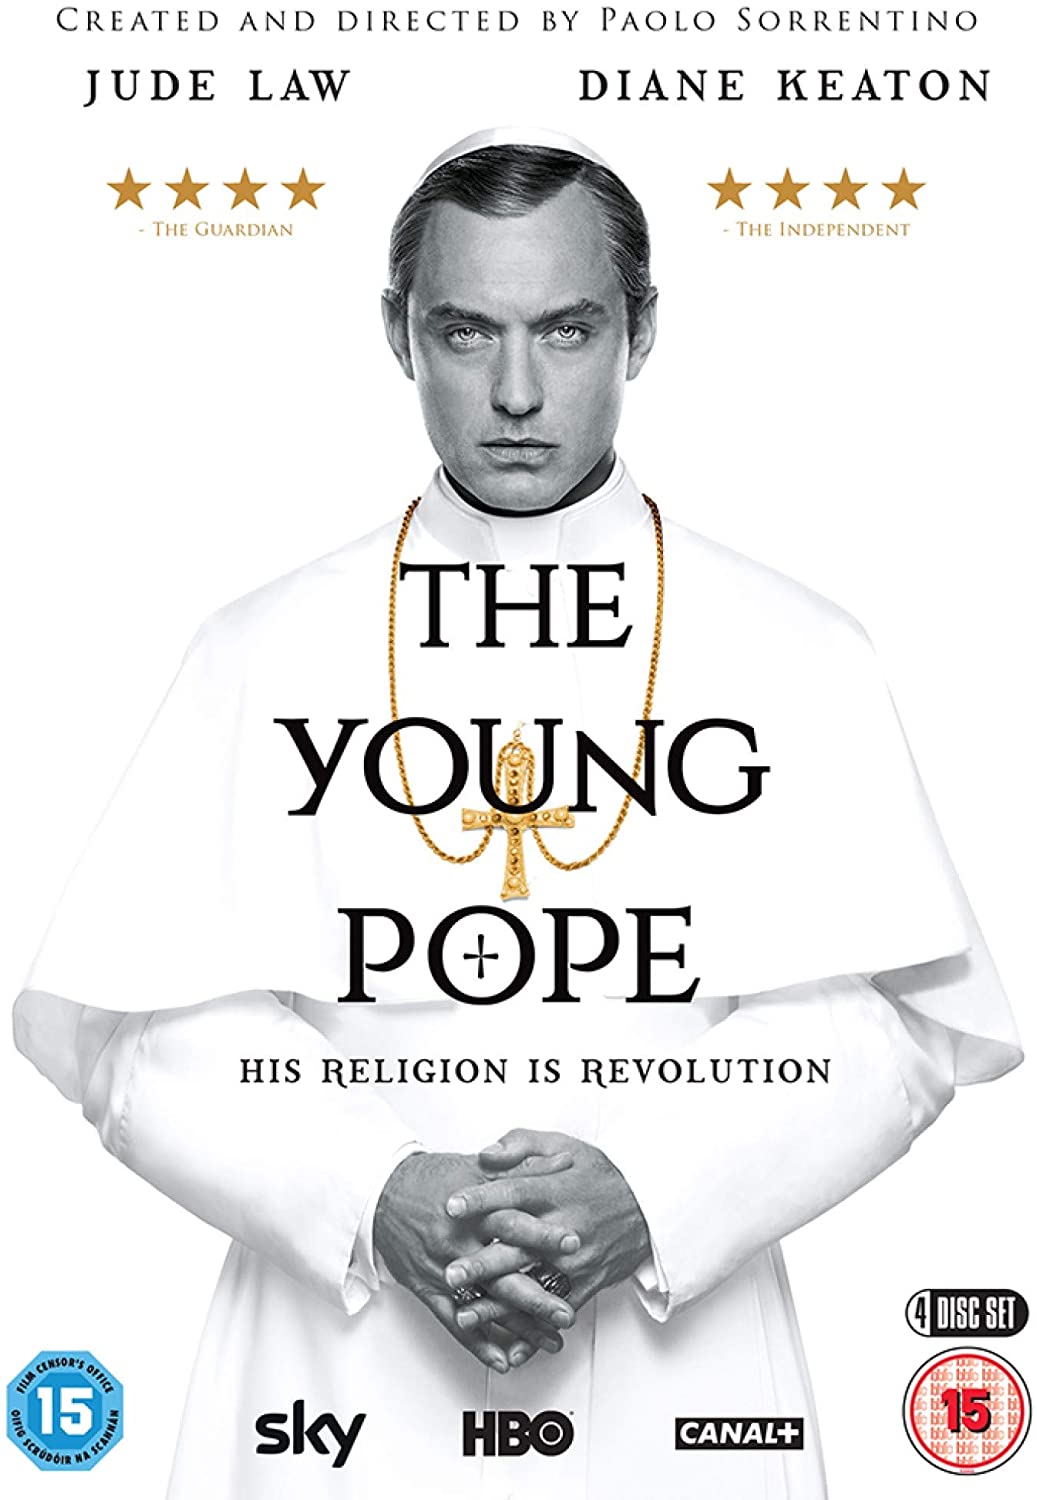 The Young Pope - Drama [DVD]